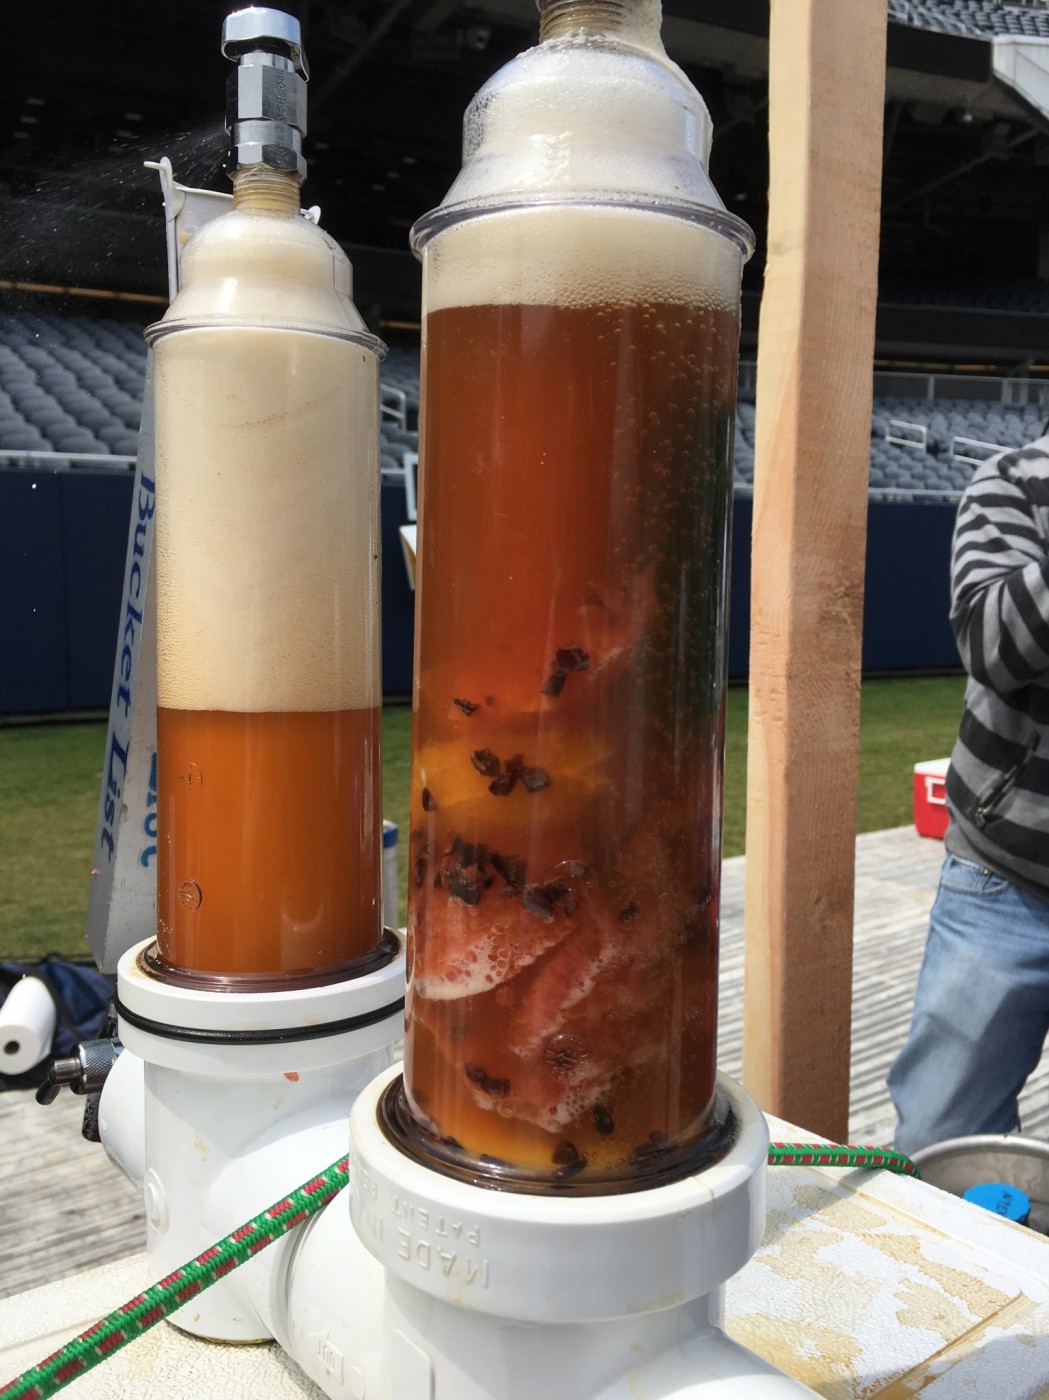 Bucket List is always known for bringing a randall to beer events.